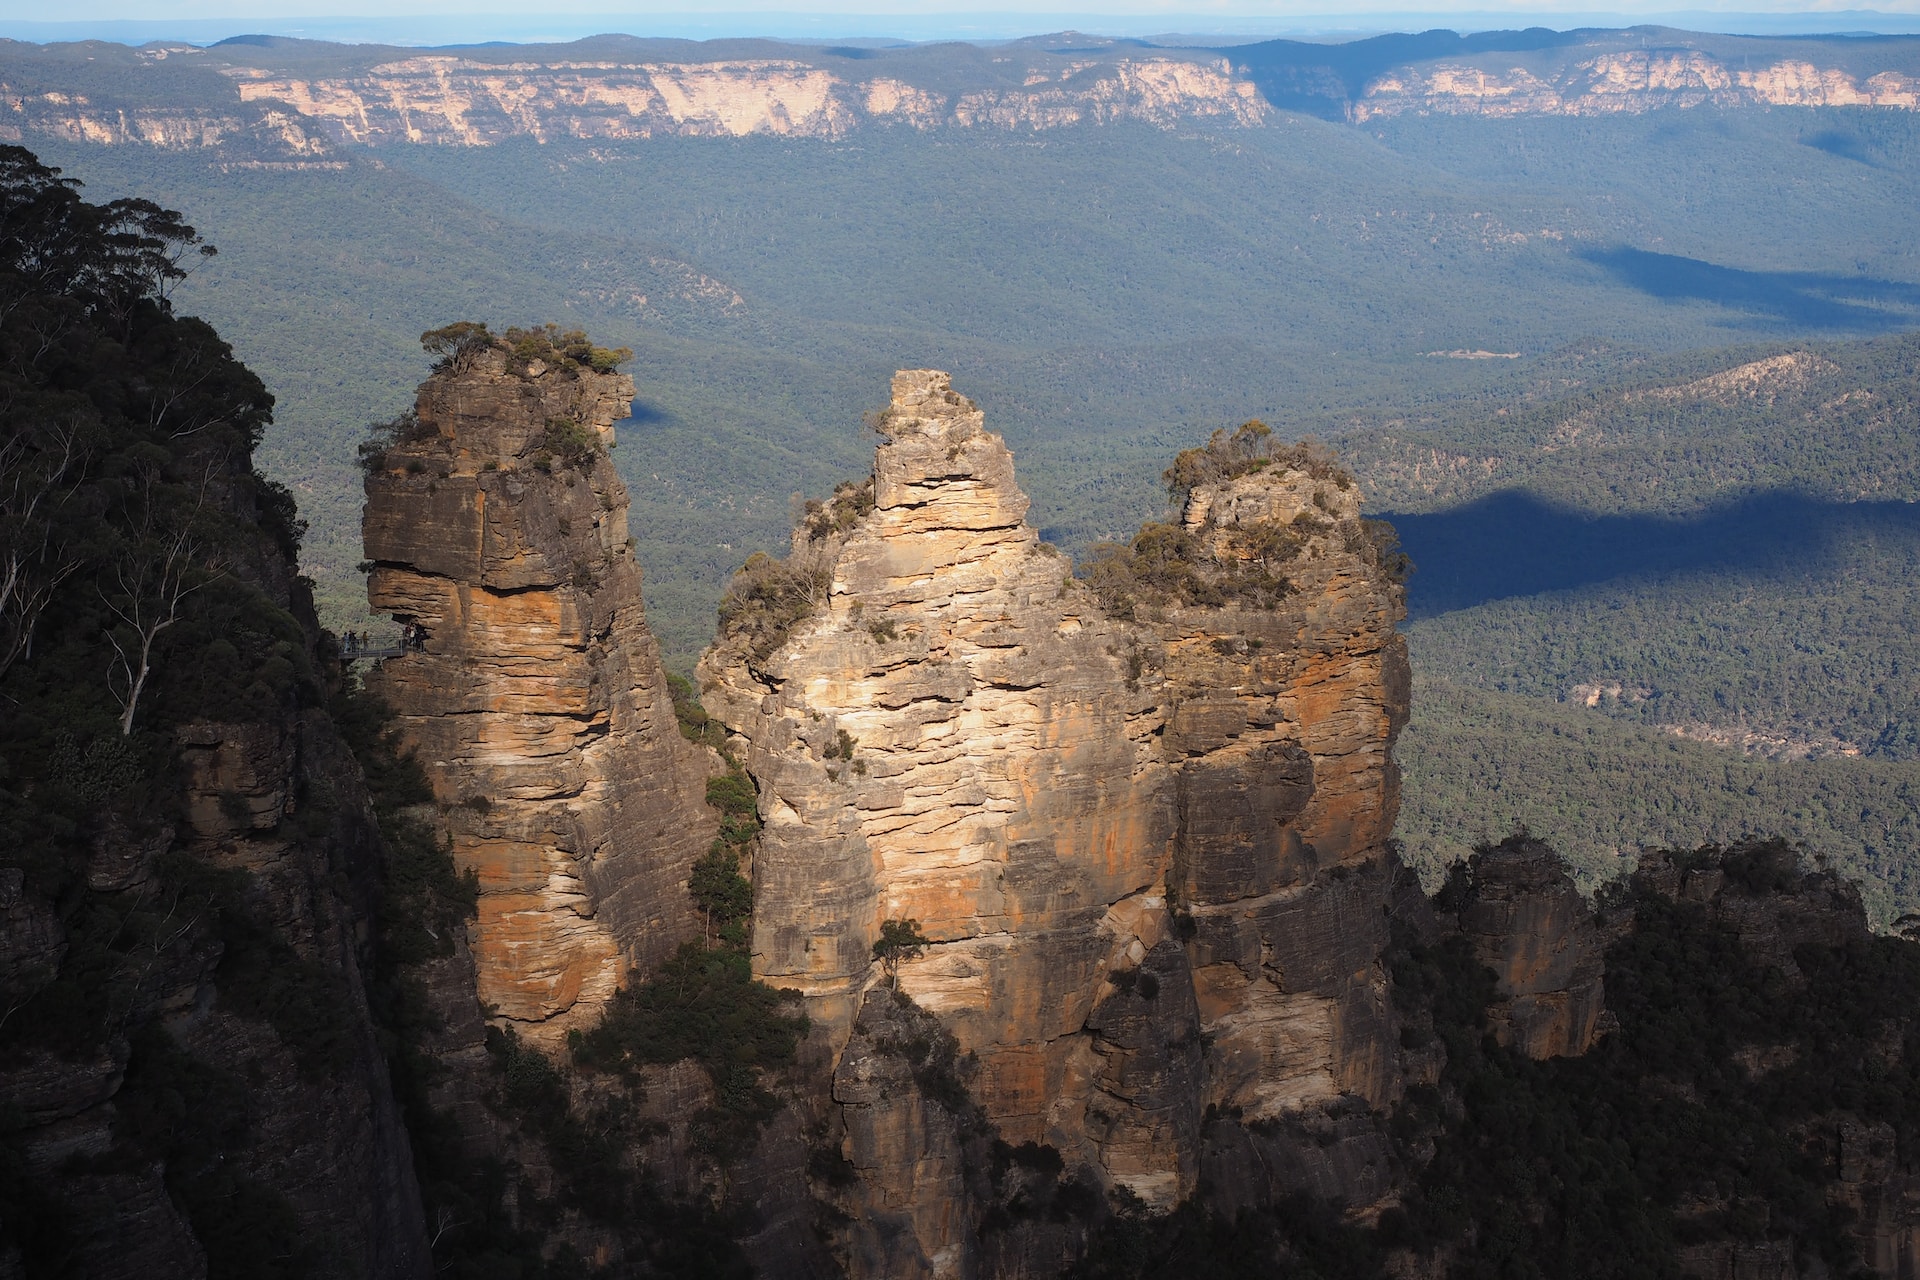 What is Katoomba known for?